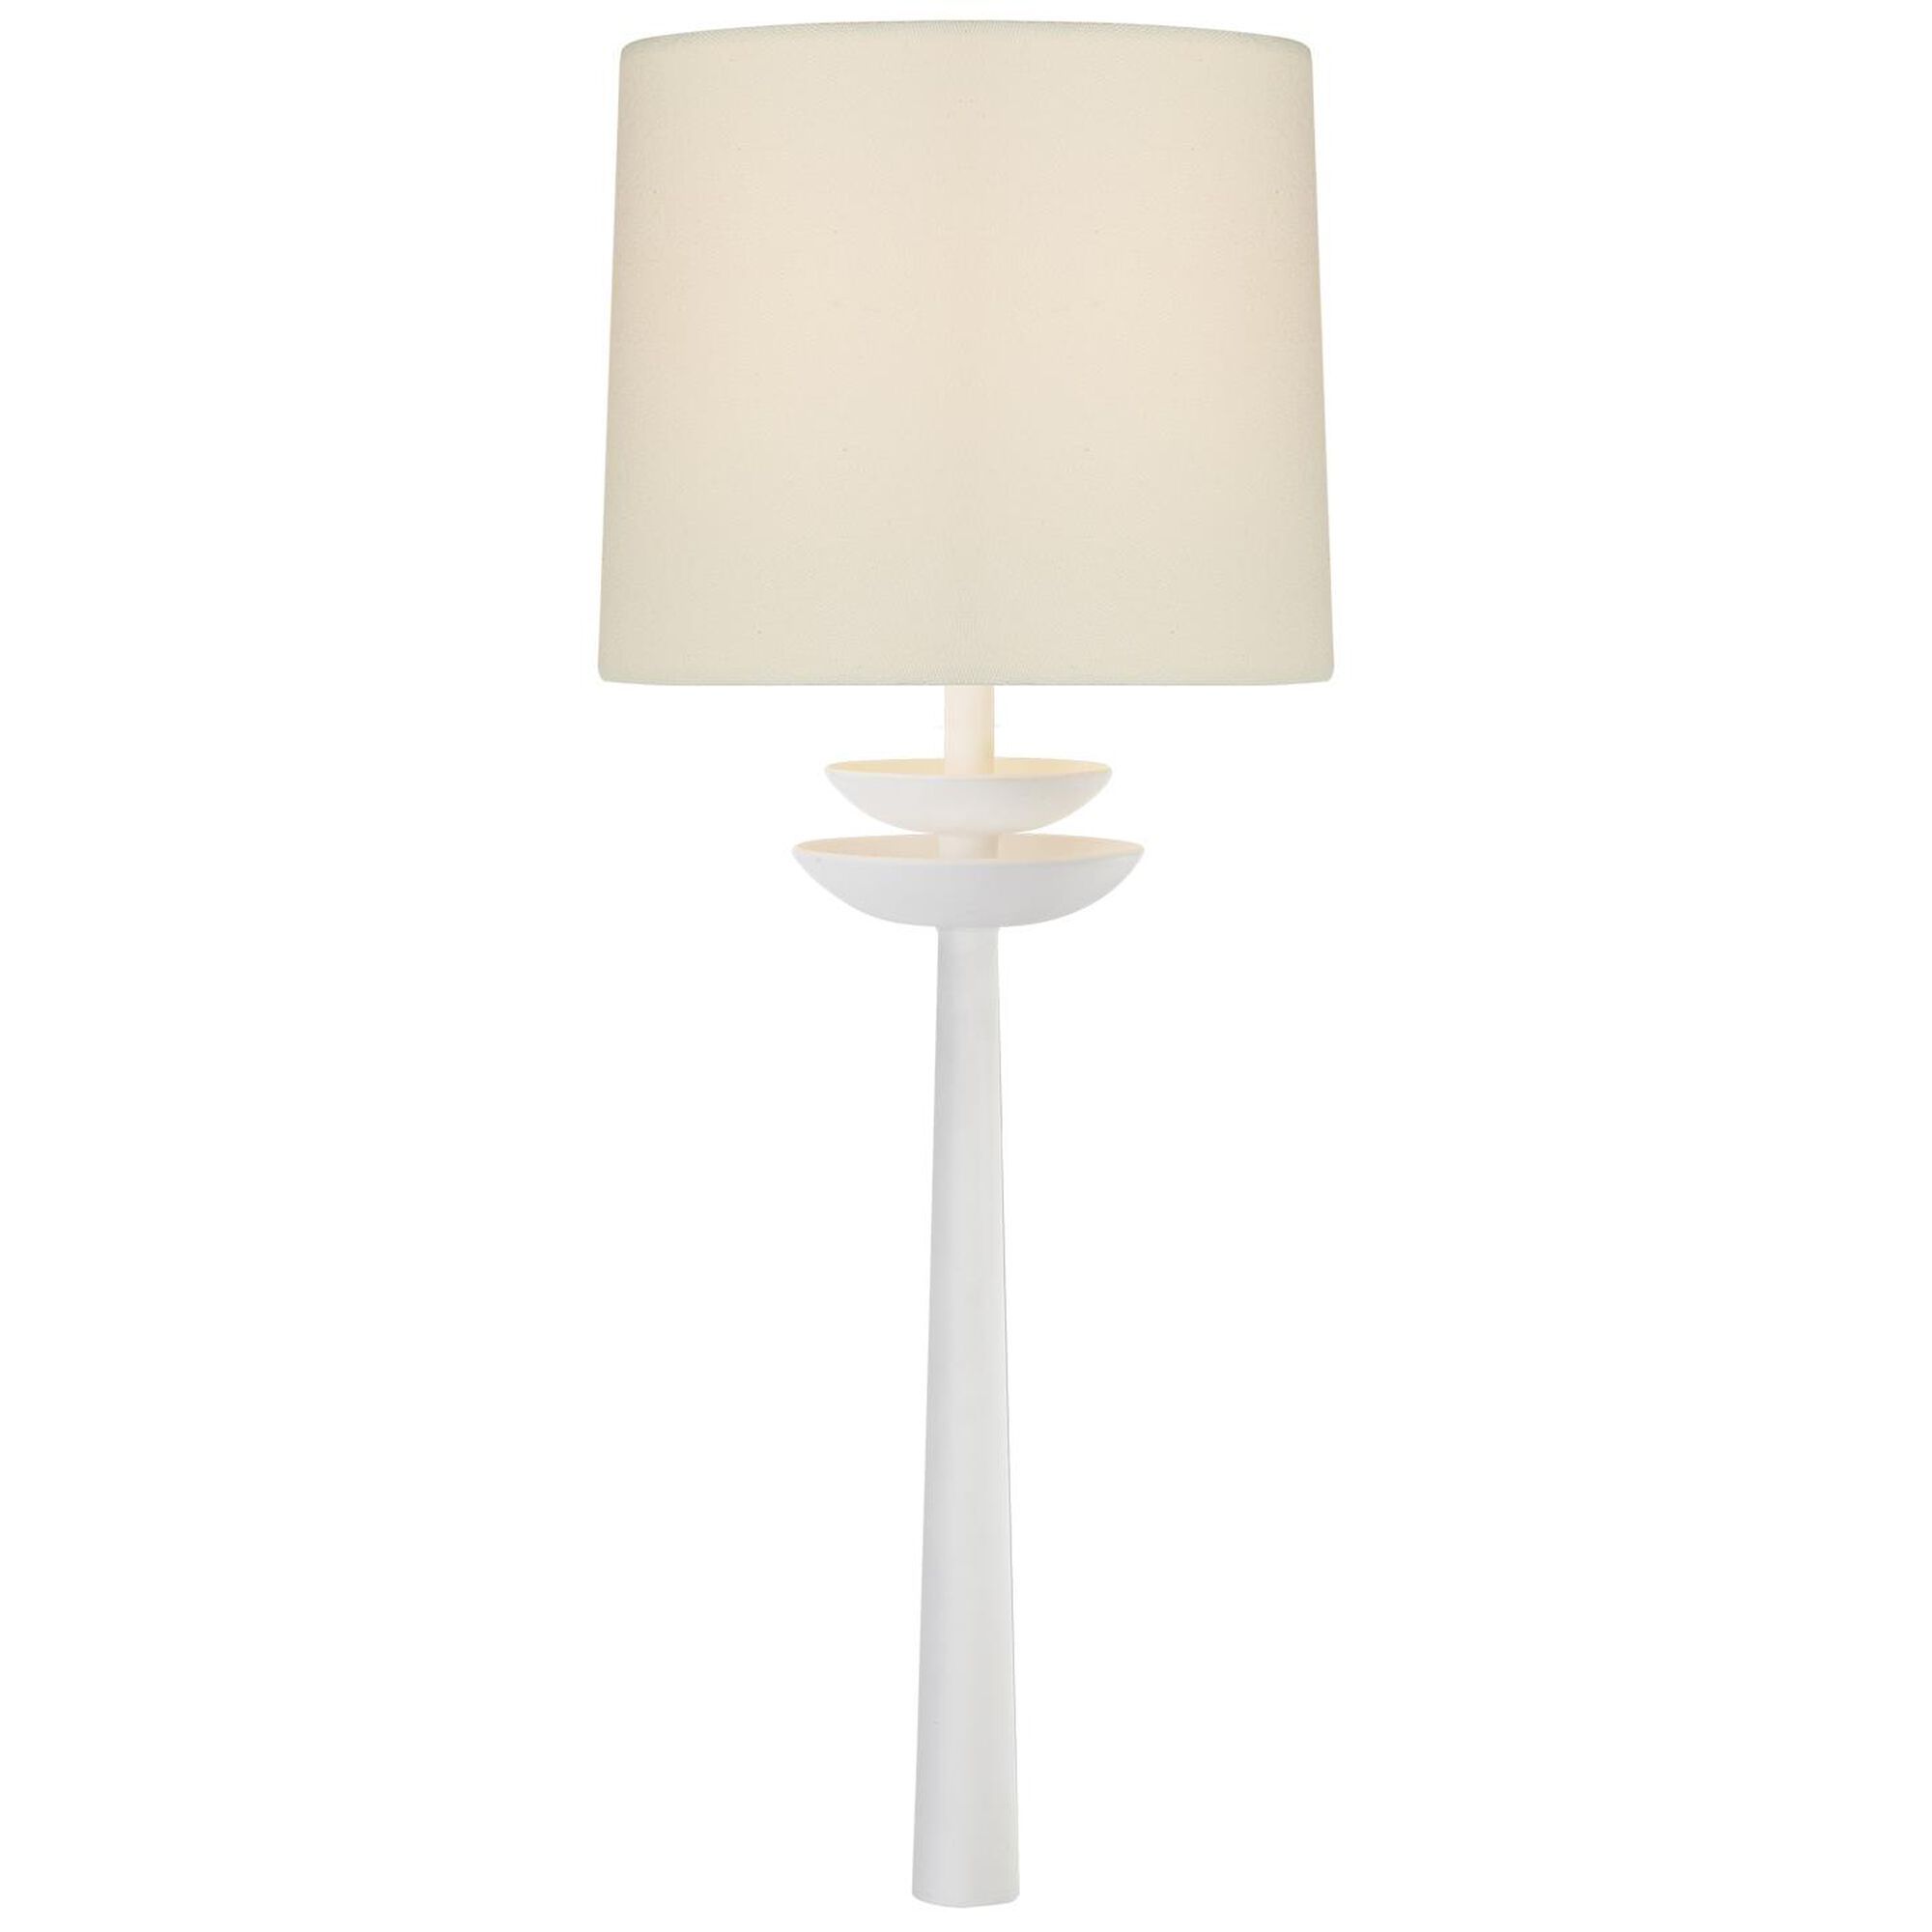 Aerin Beaumont 19 Inch Wall Sconce by Visual Comfort and Co. | Capitol Lighting 1800lighting.com